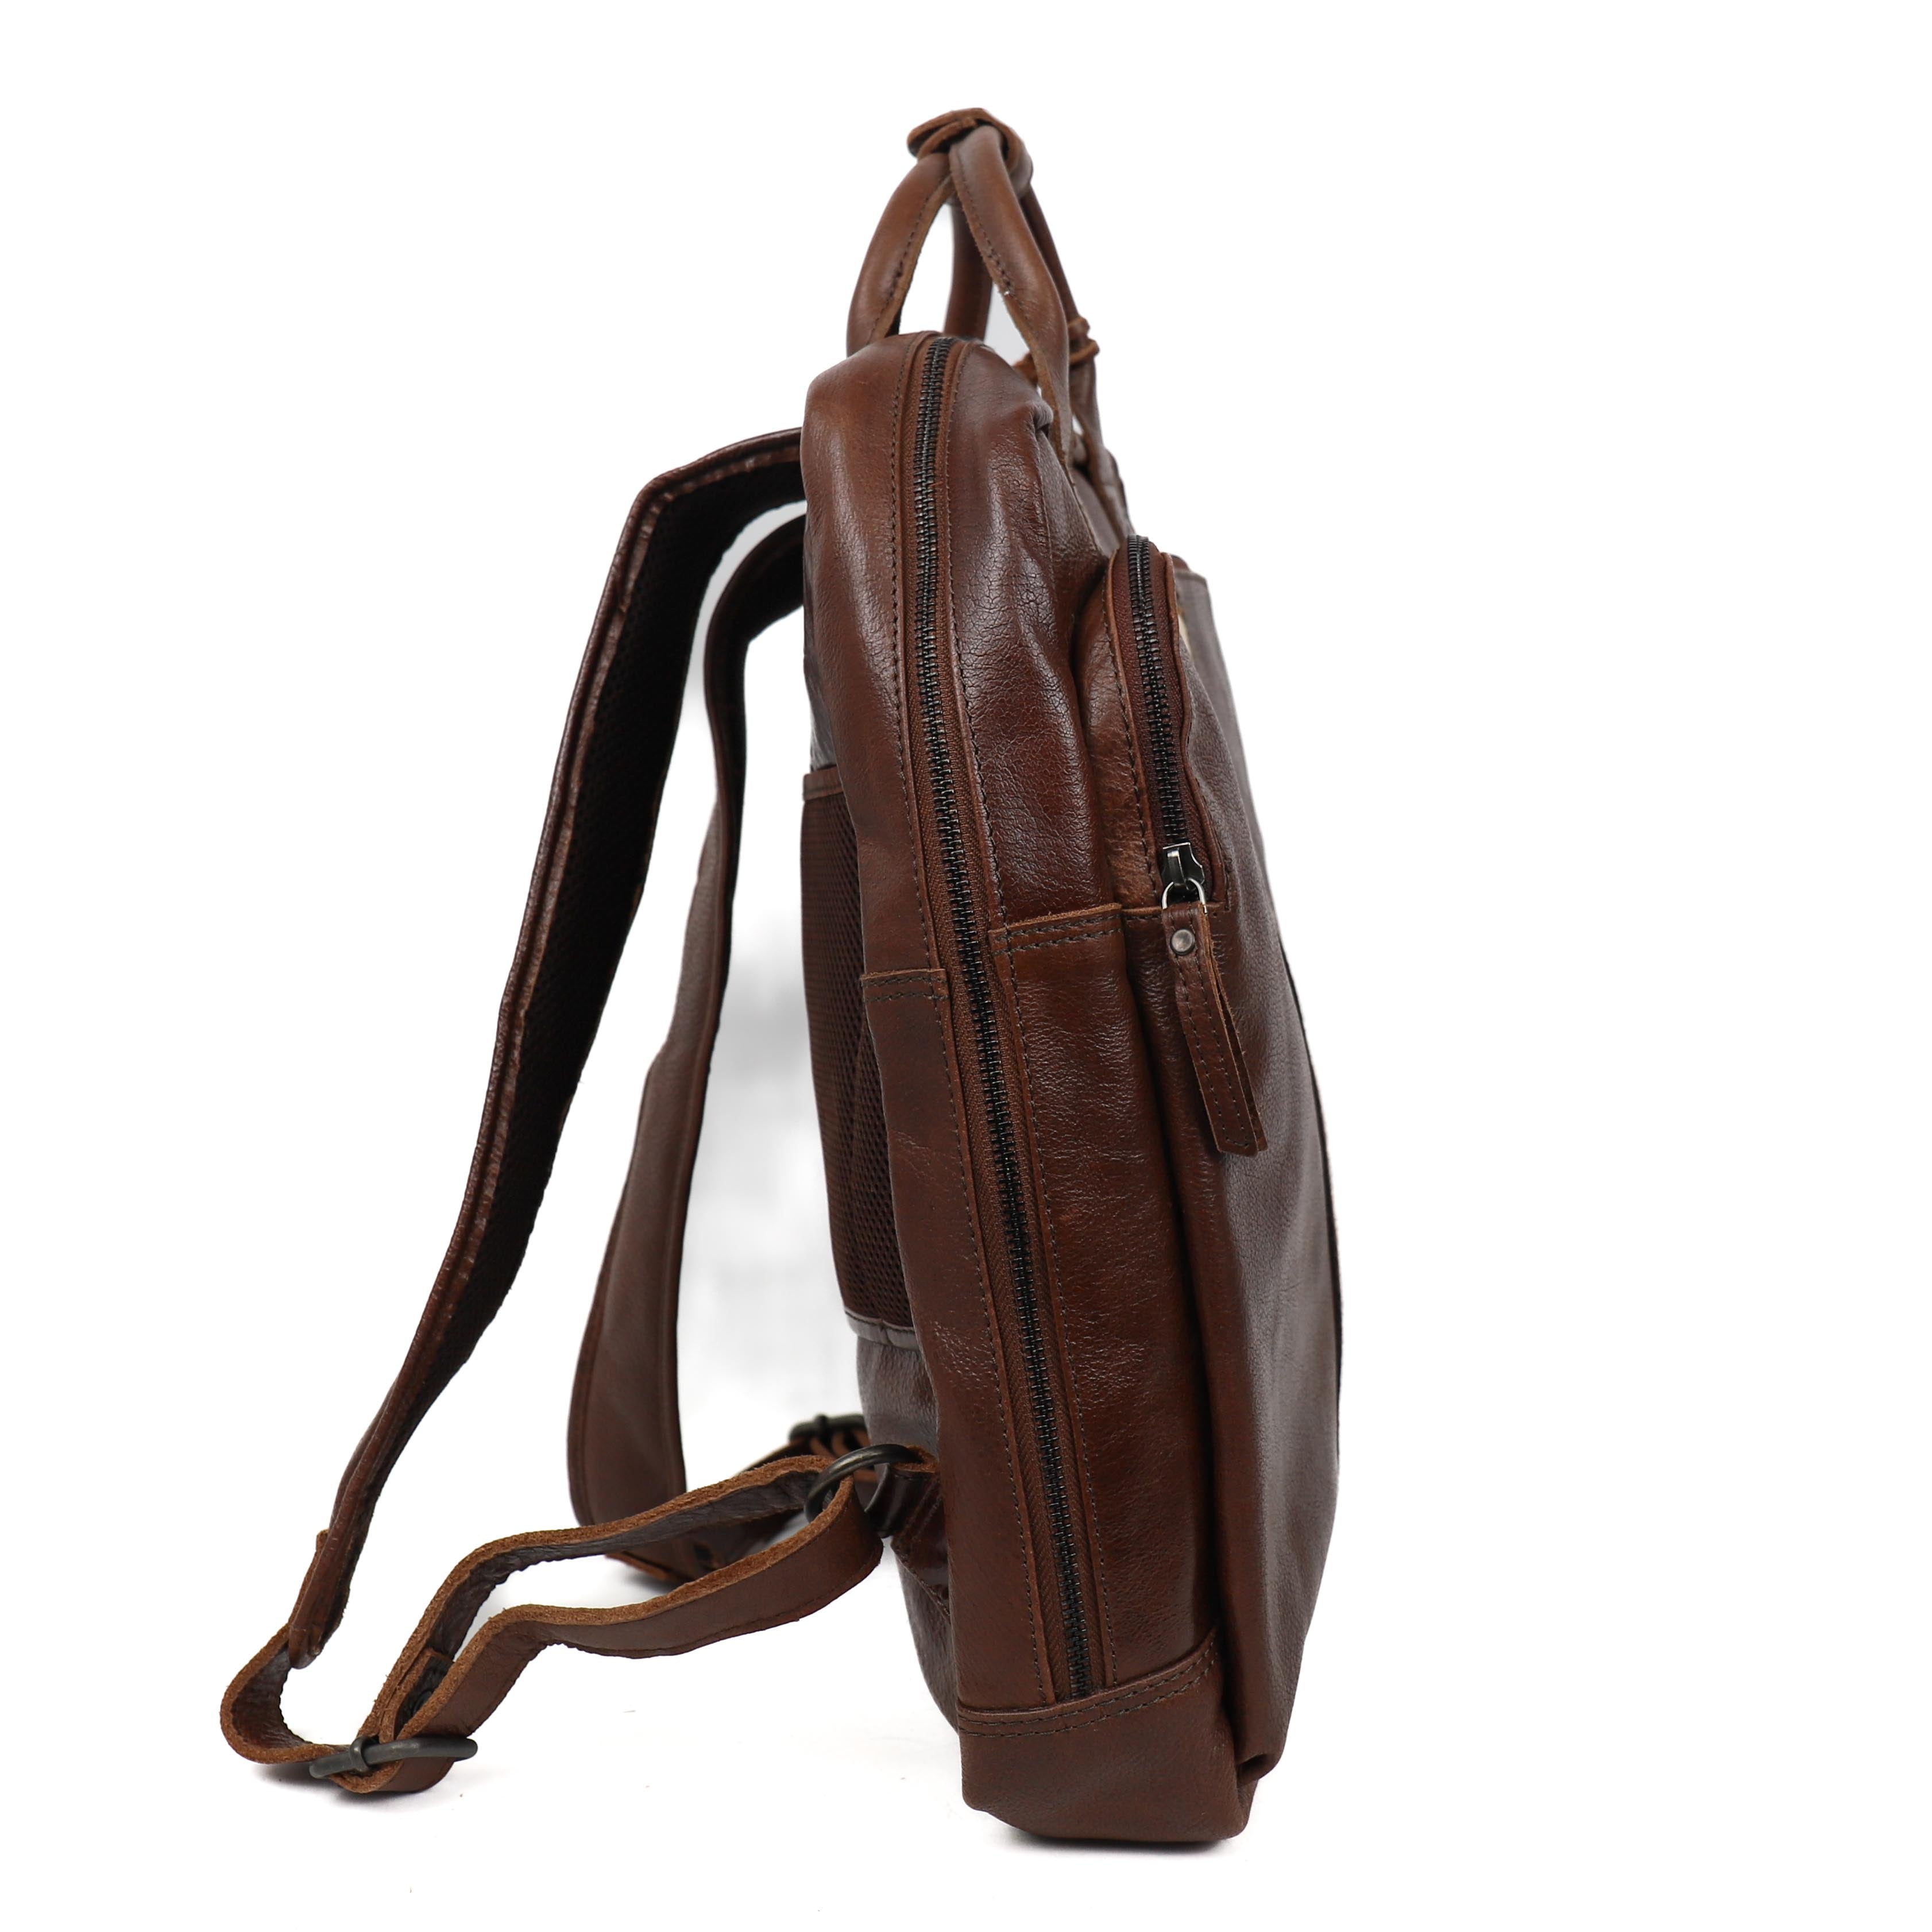 Backpack 'Anthony' brown/stripe